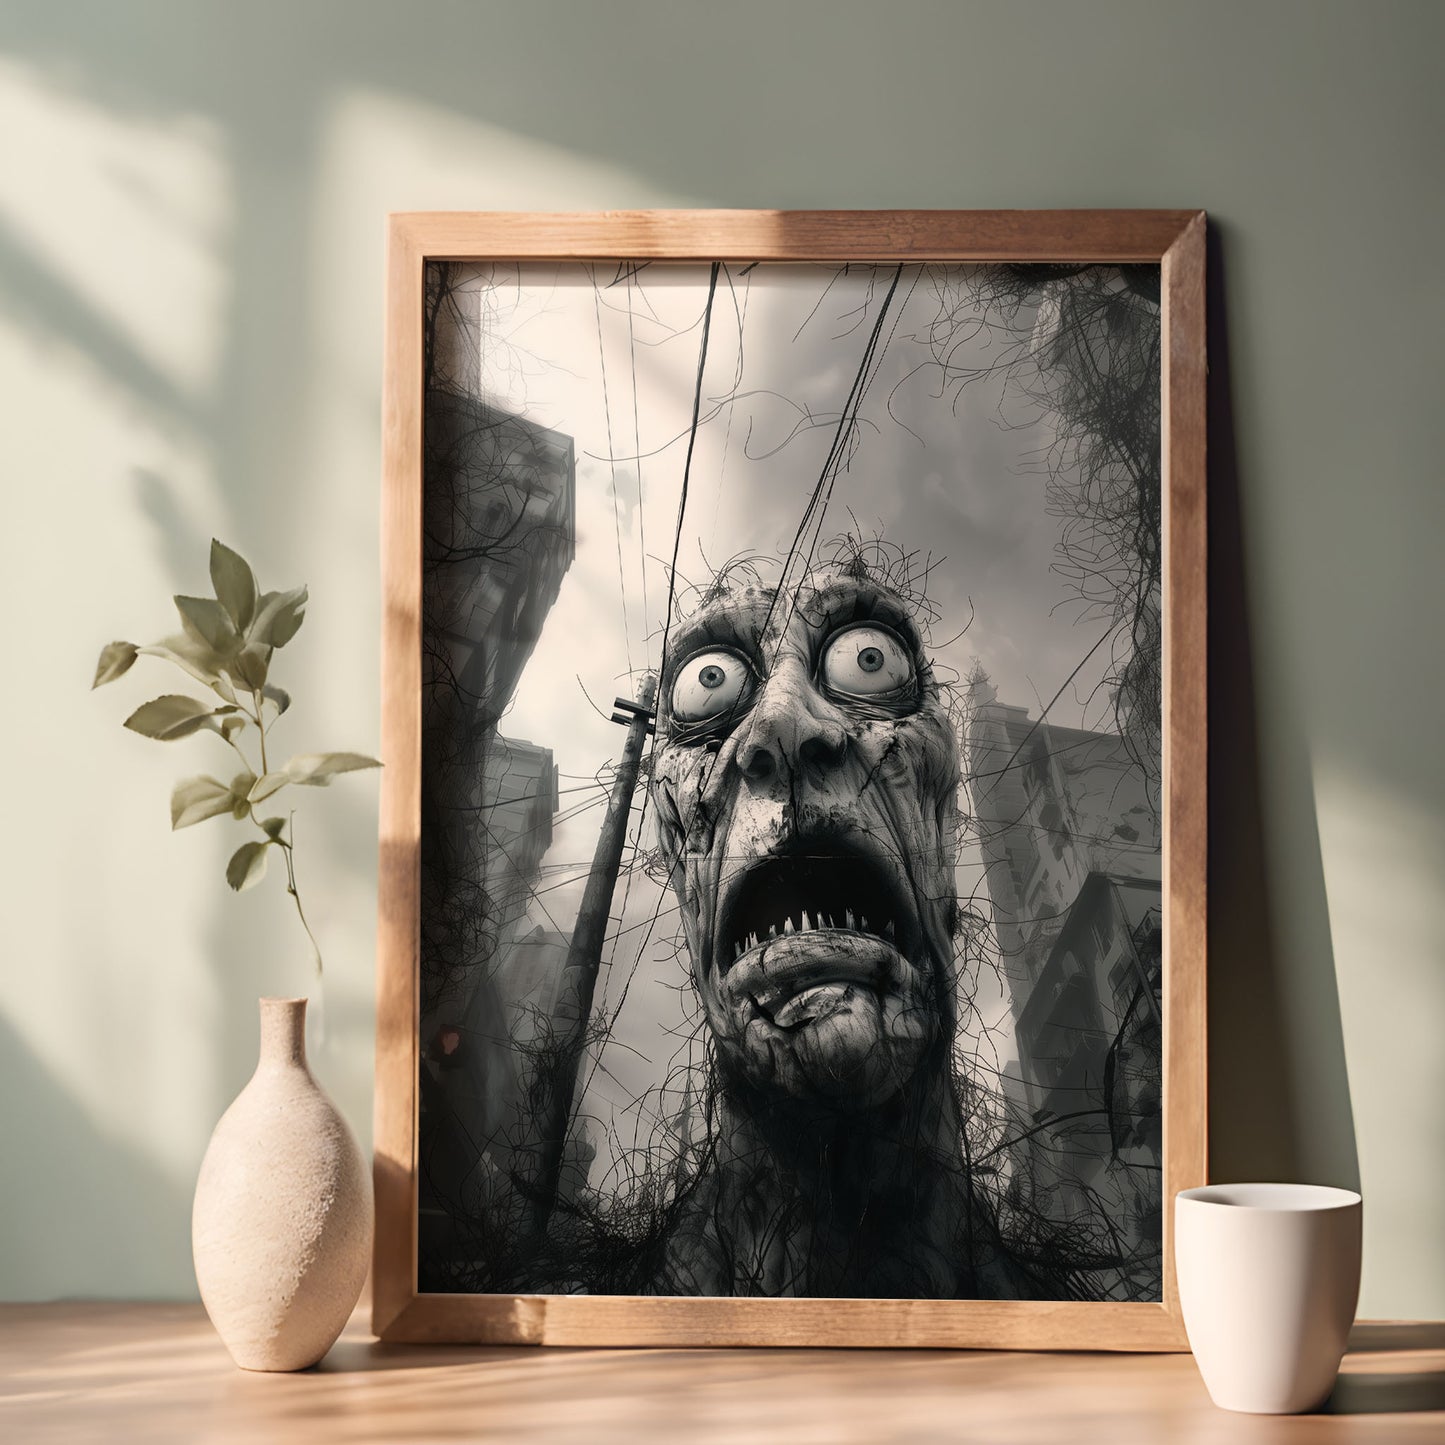 Eerie Wall Art - 'Look, There, It's Coming' Gothic Poster Print